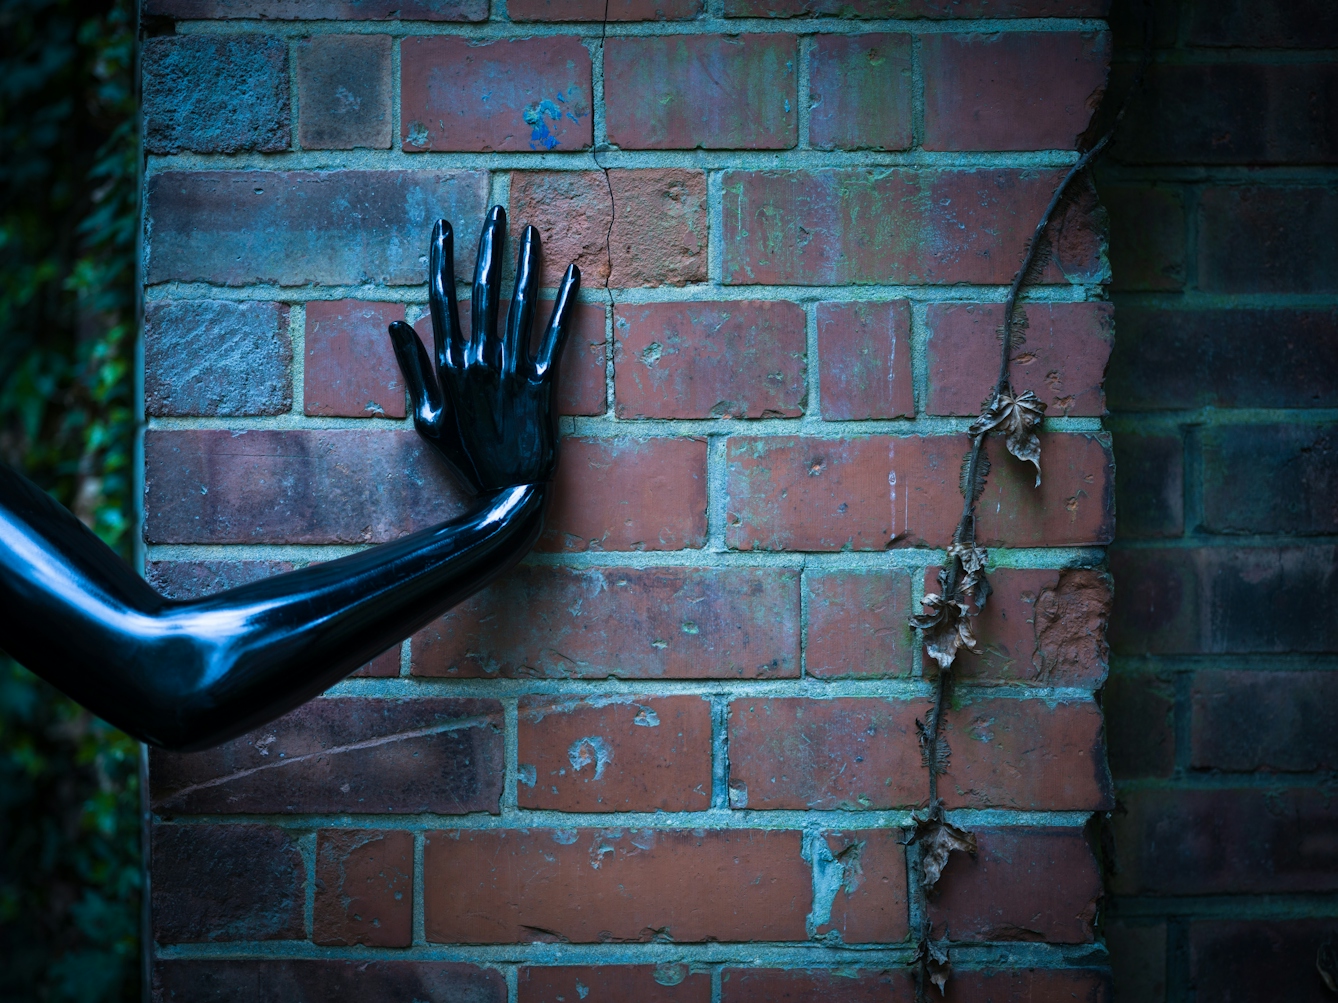 Photograph of a brick wall with the human form of a shiny black hand and arm pressed up against it.